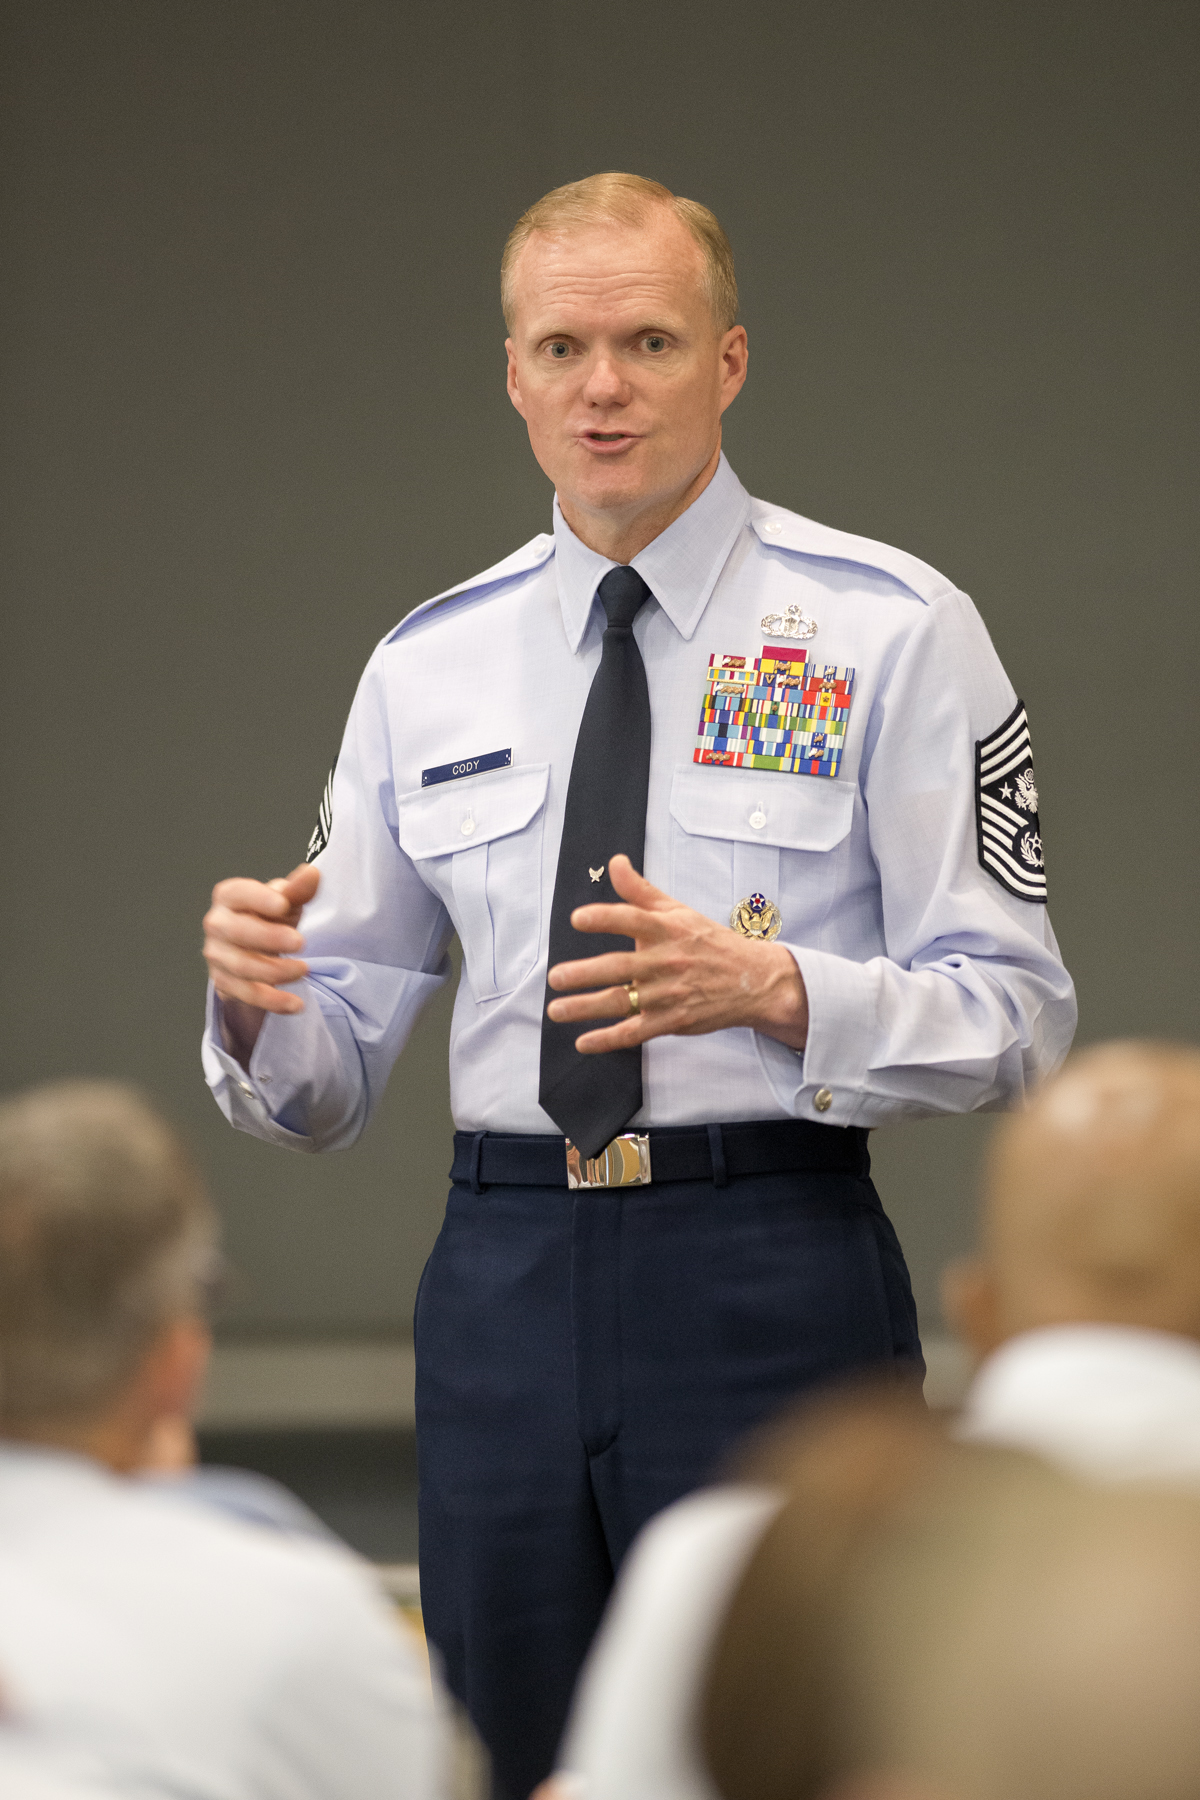 The Chief Master Sergeant of the Air Force, James A. Cody